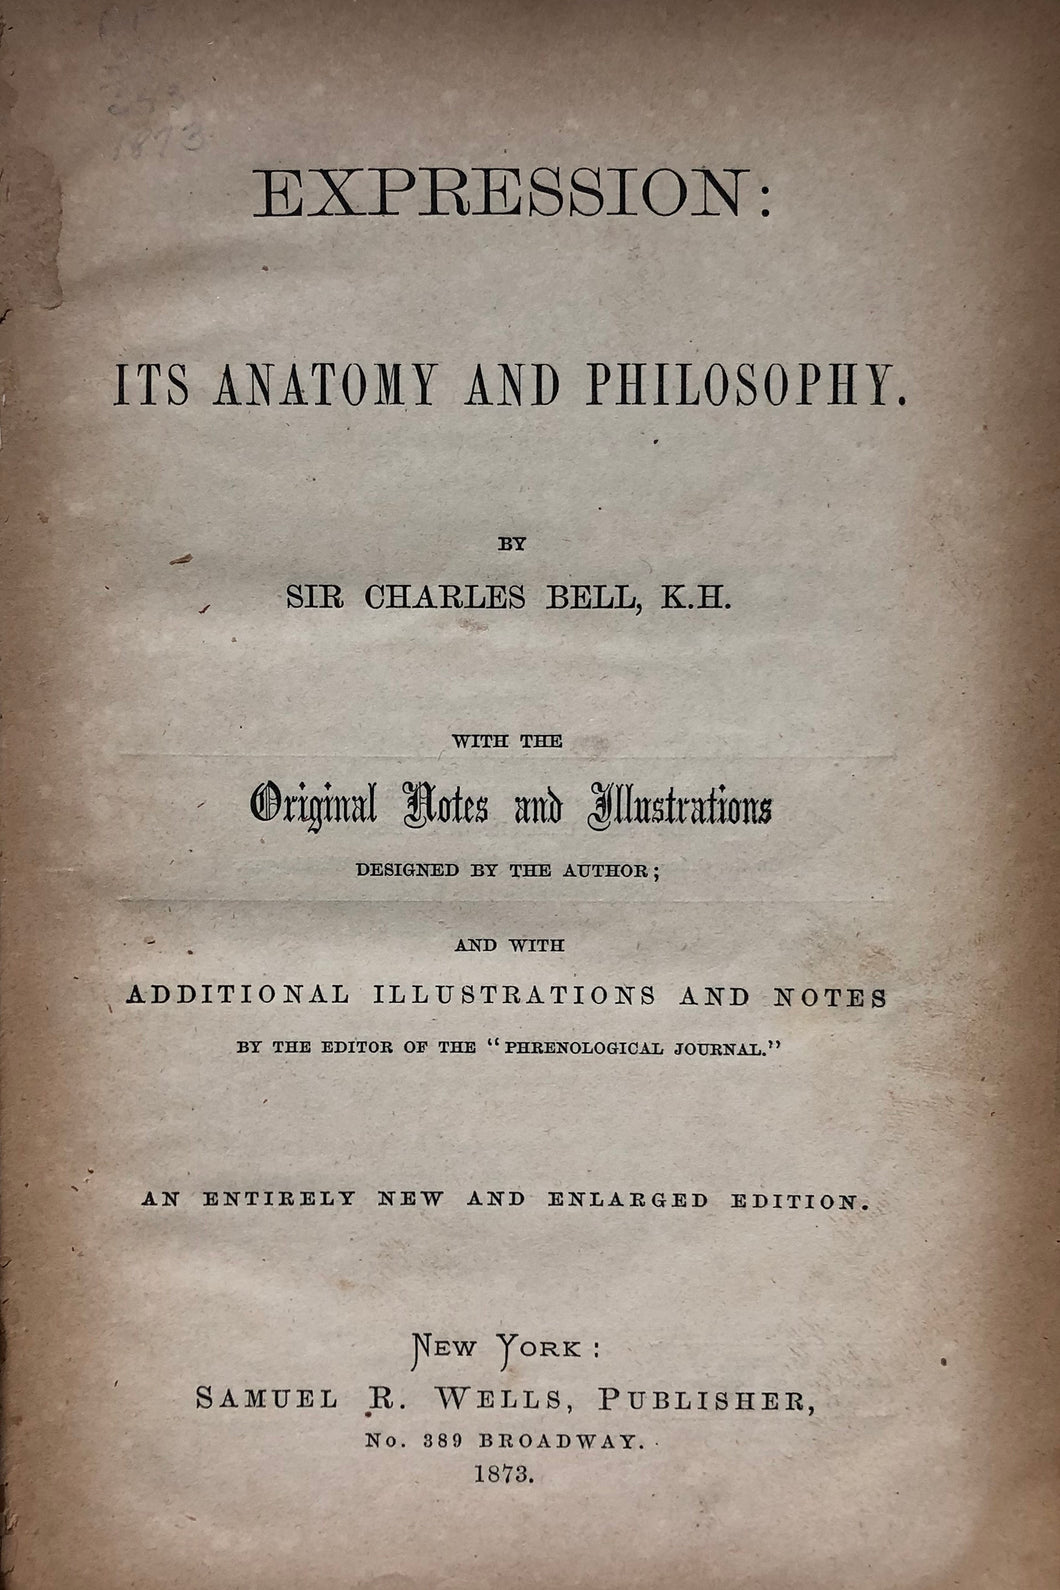 Expression : its anatomy and philosophy / with the original notes and illustrations designed by the author